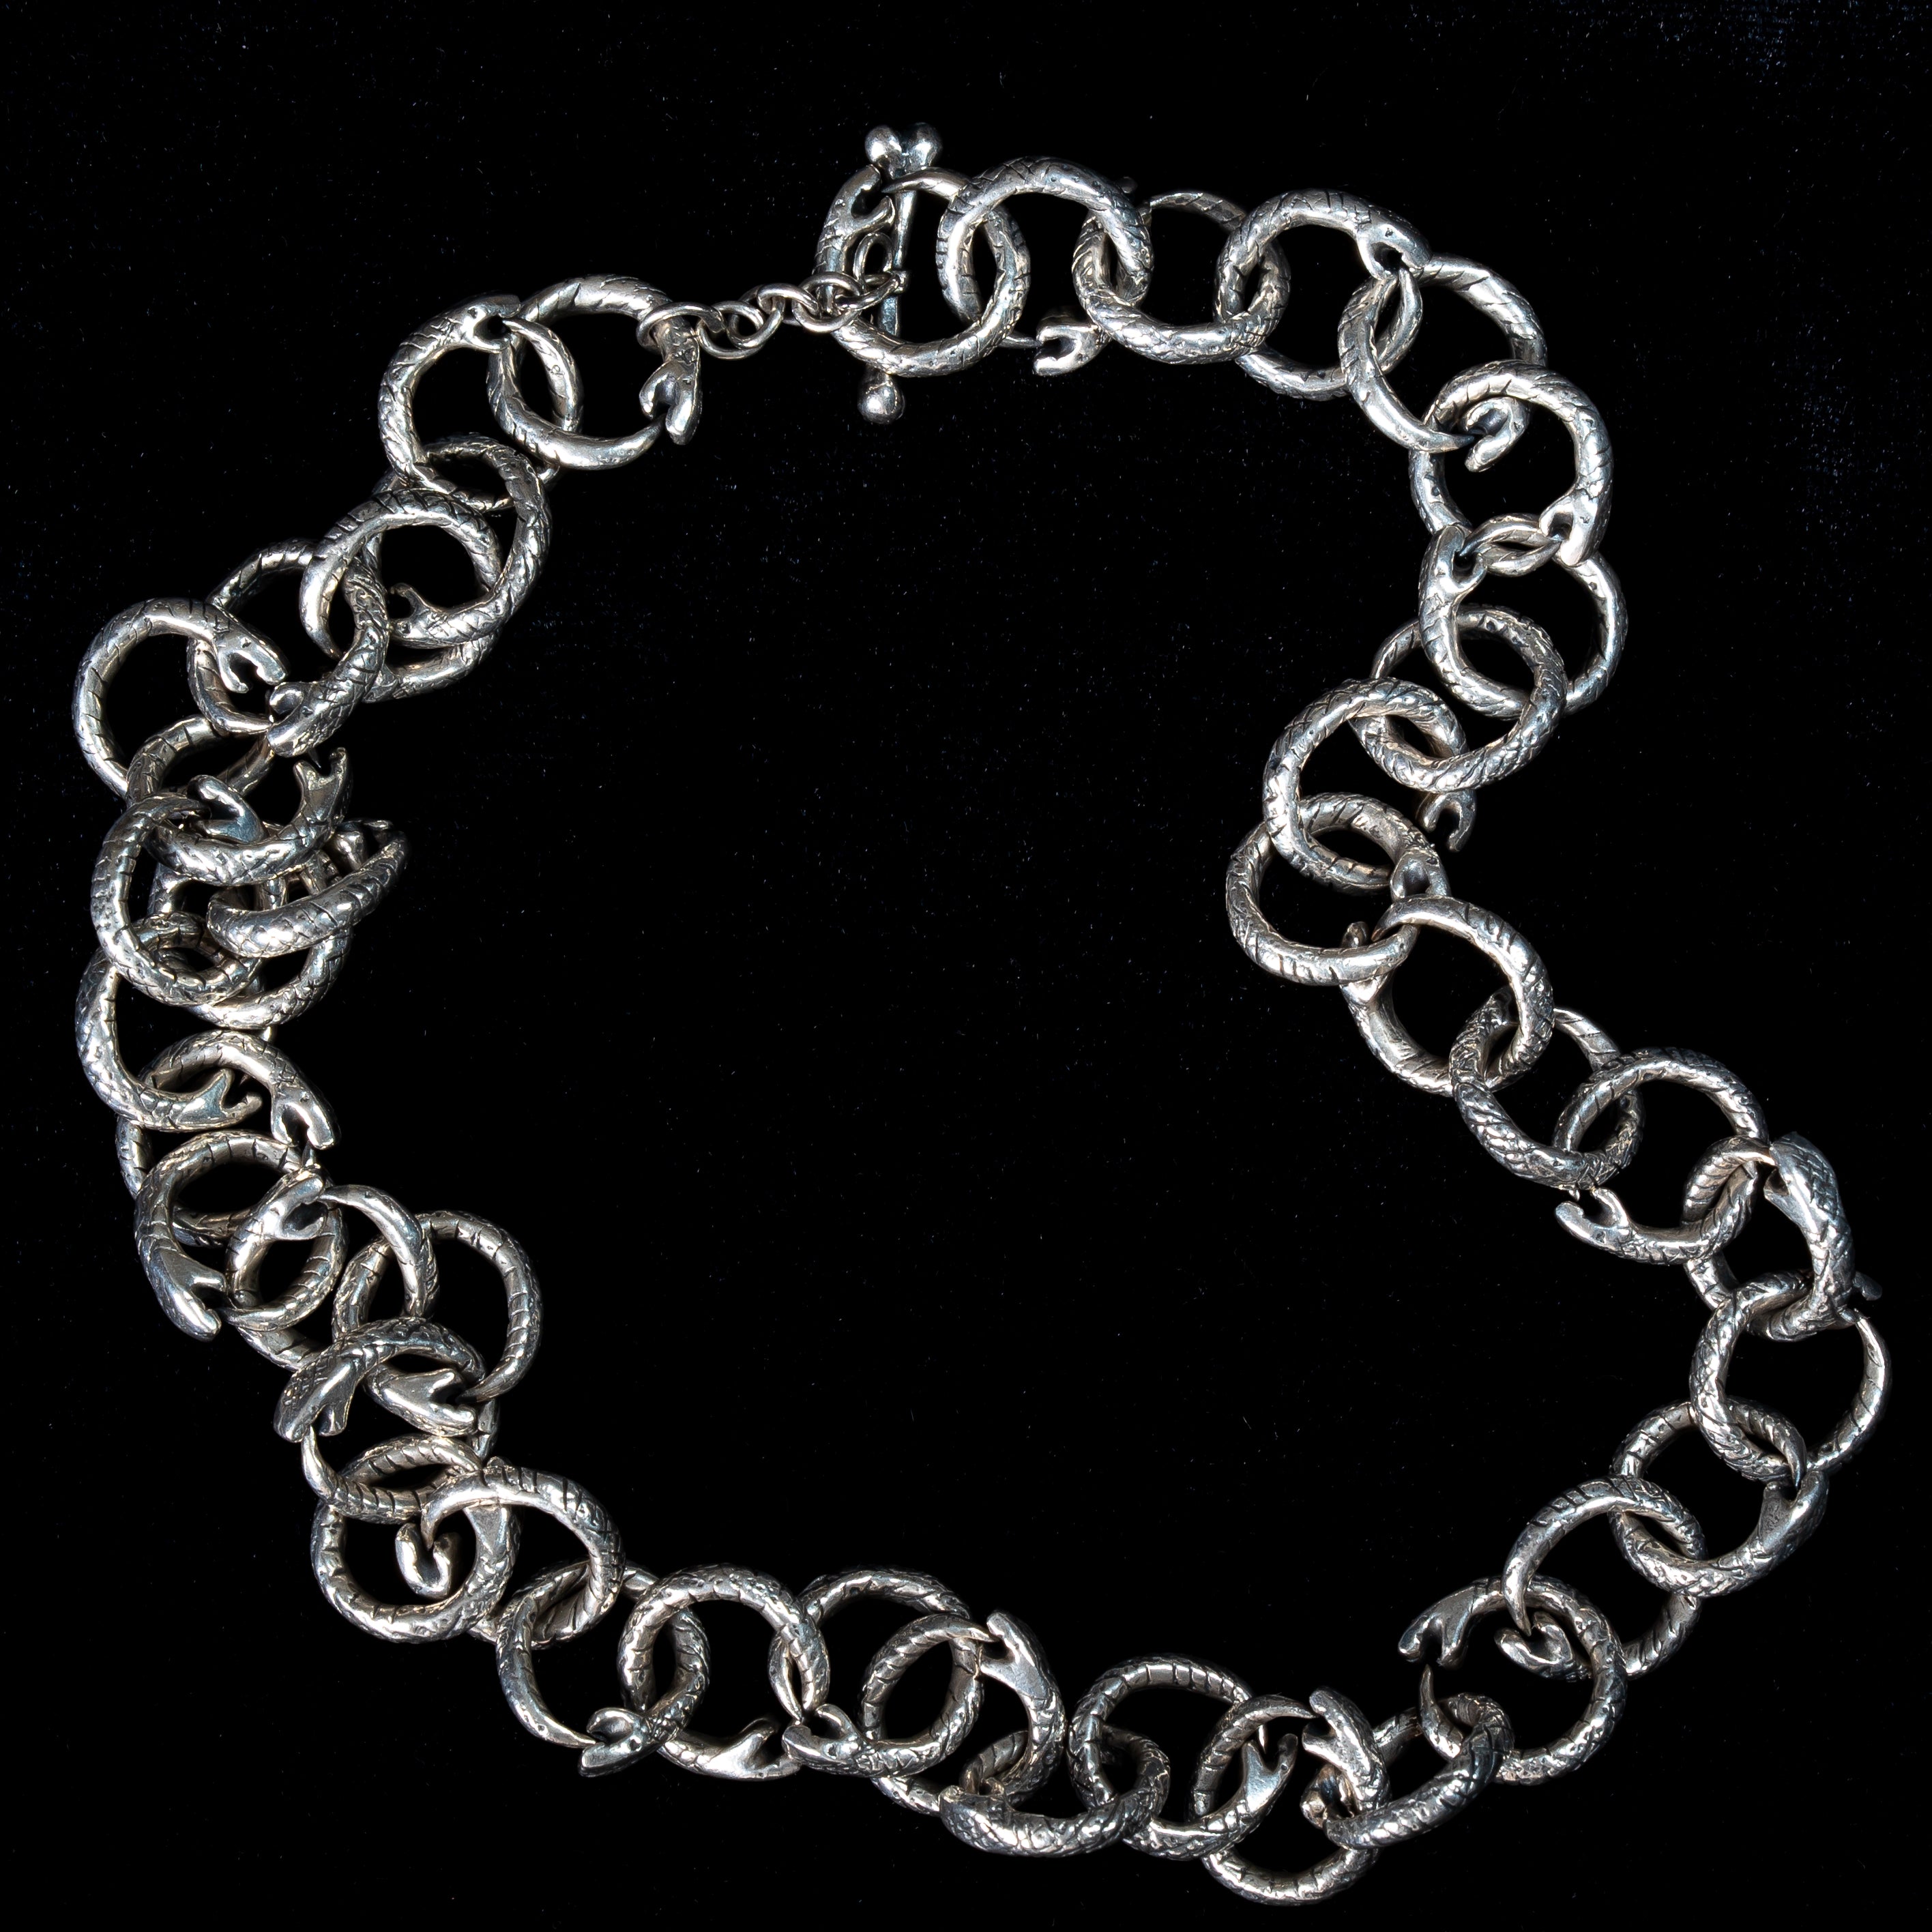 gothic handmade chunky chain necklace in sterling silver on  black background